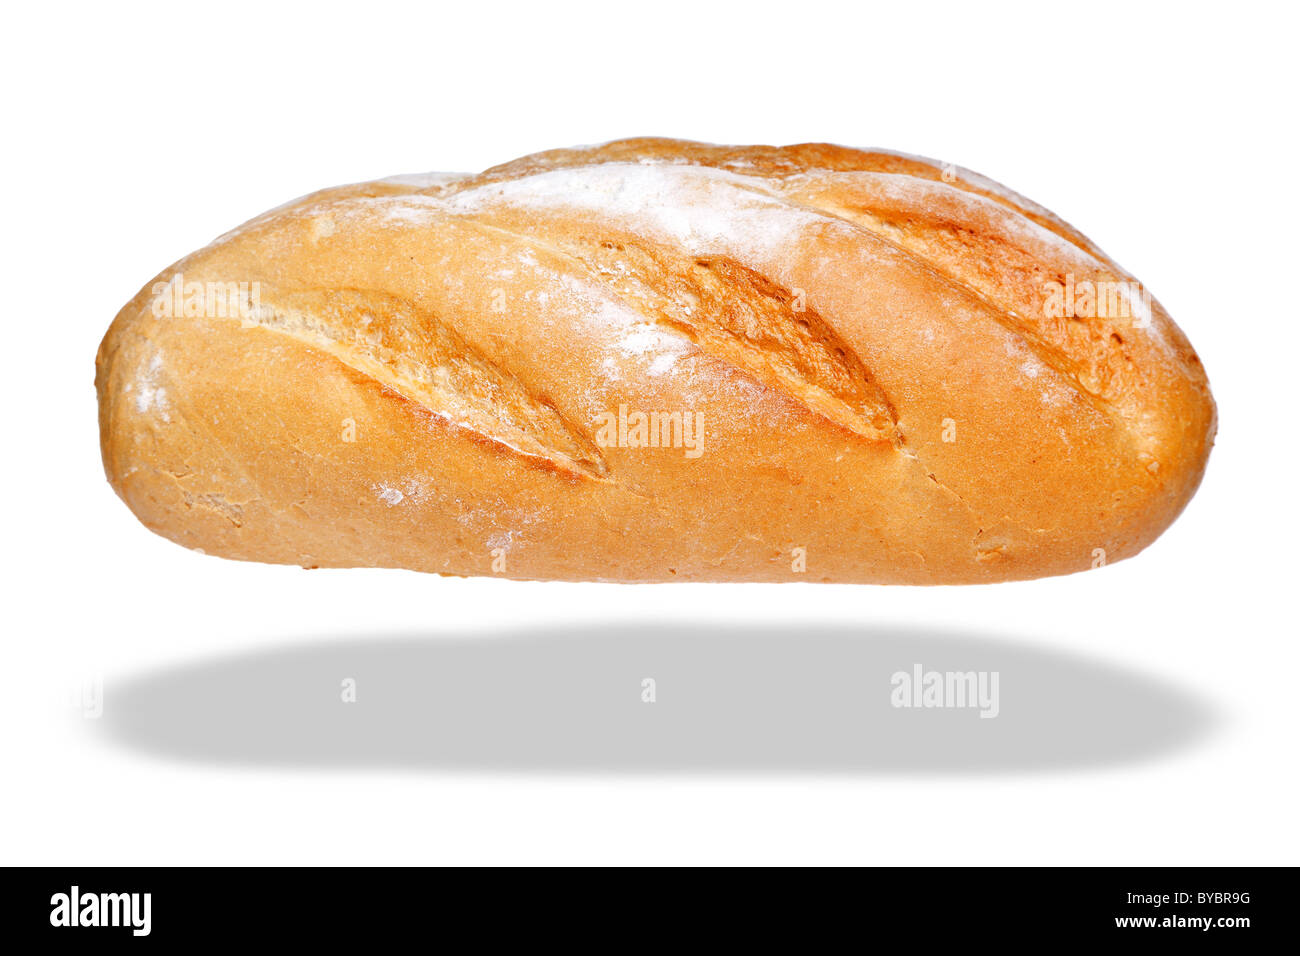 Photo of a white bloomer loaf of bread, isolated on a white background with floating shadow. Stock Photo